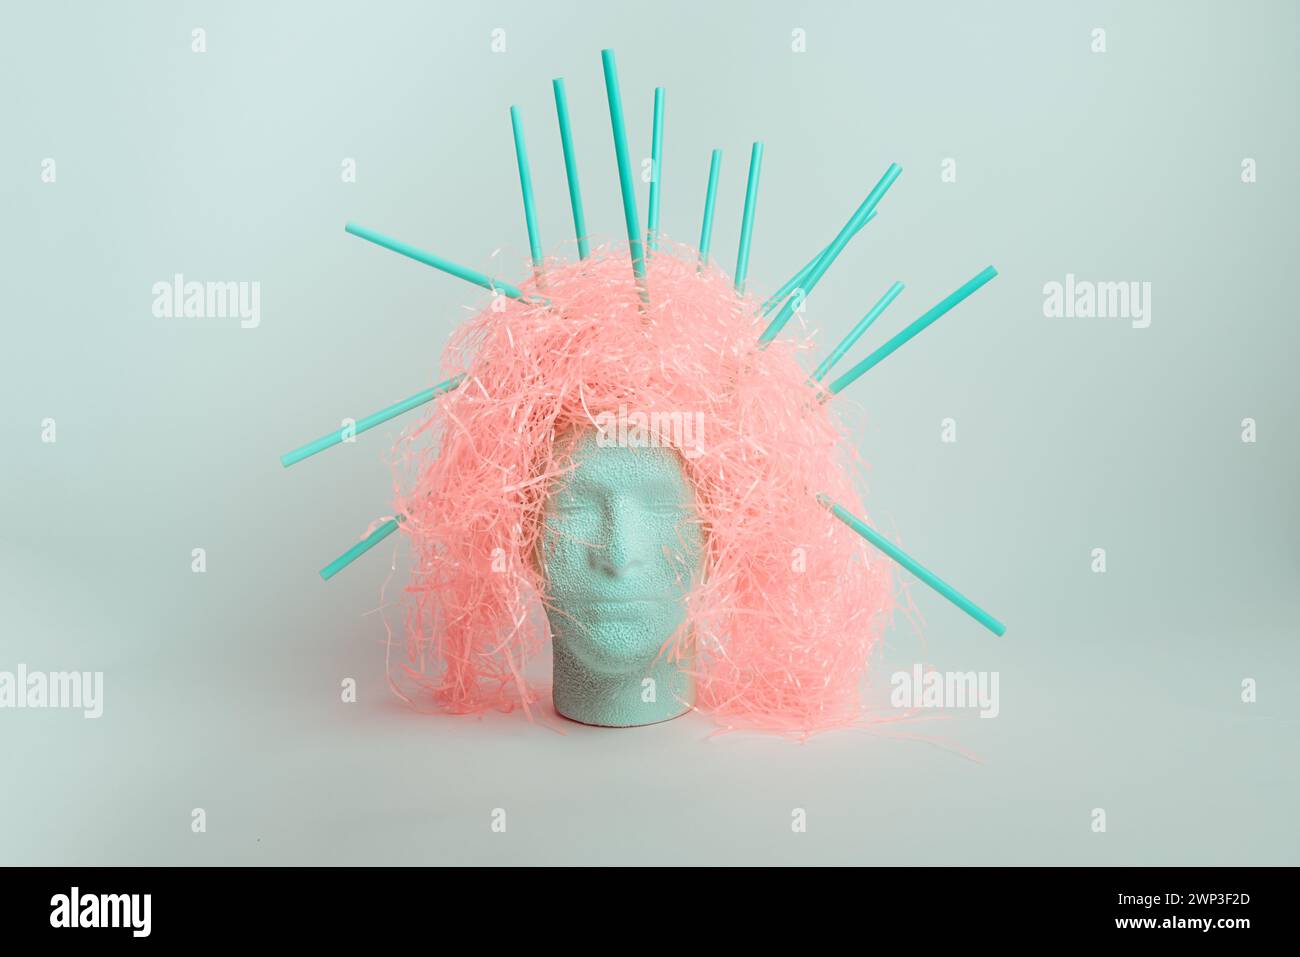 Abstract concept of a scatterbrain, modelhead with crazy hair and straws Stock Photo